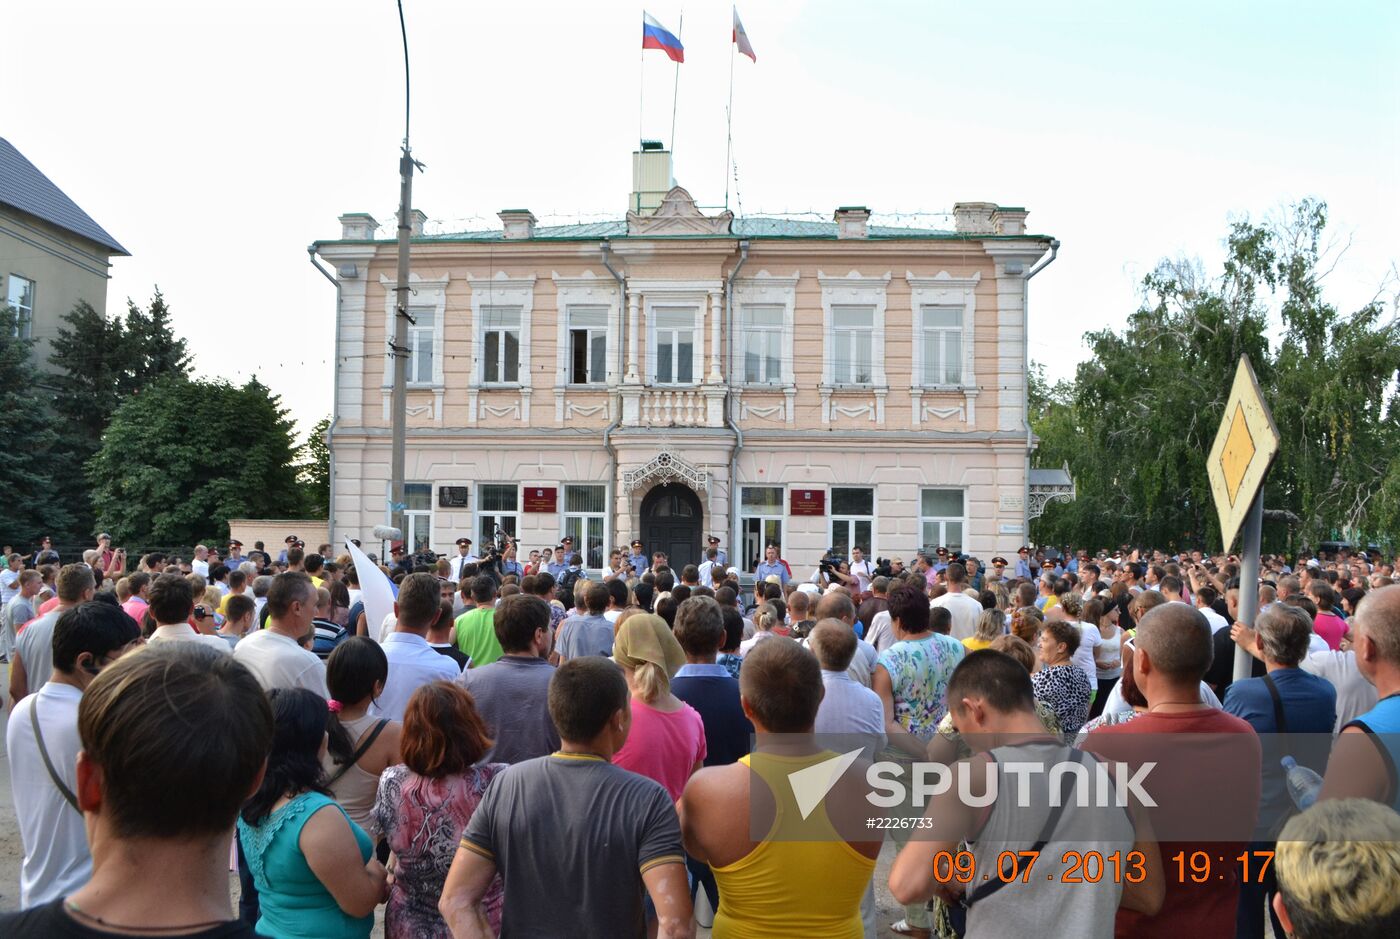 Pugachyov residents rally against migrants